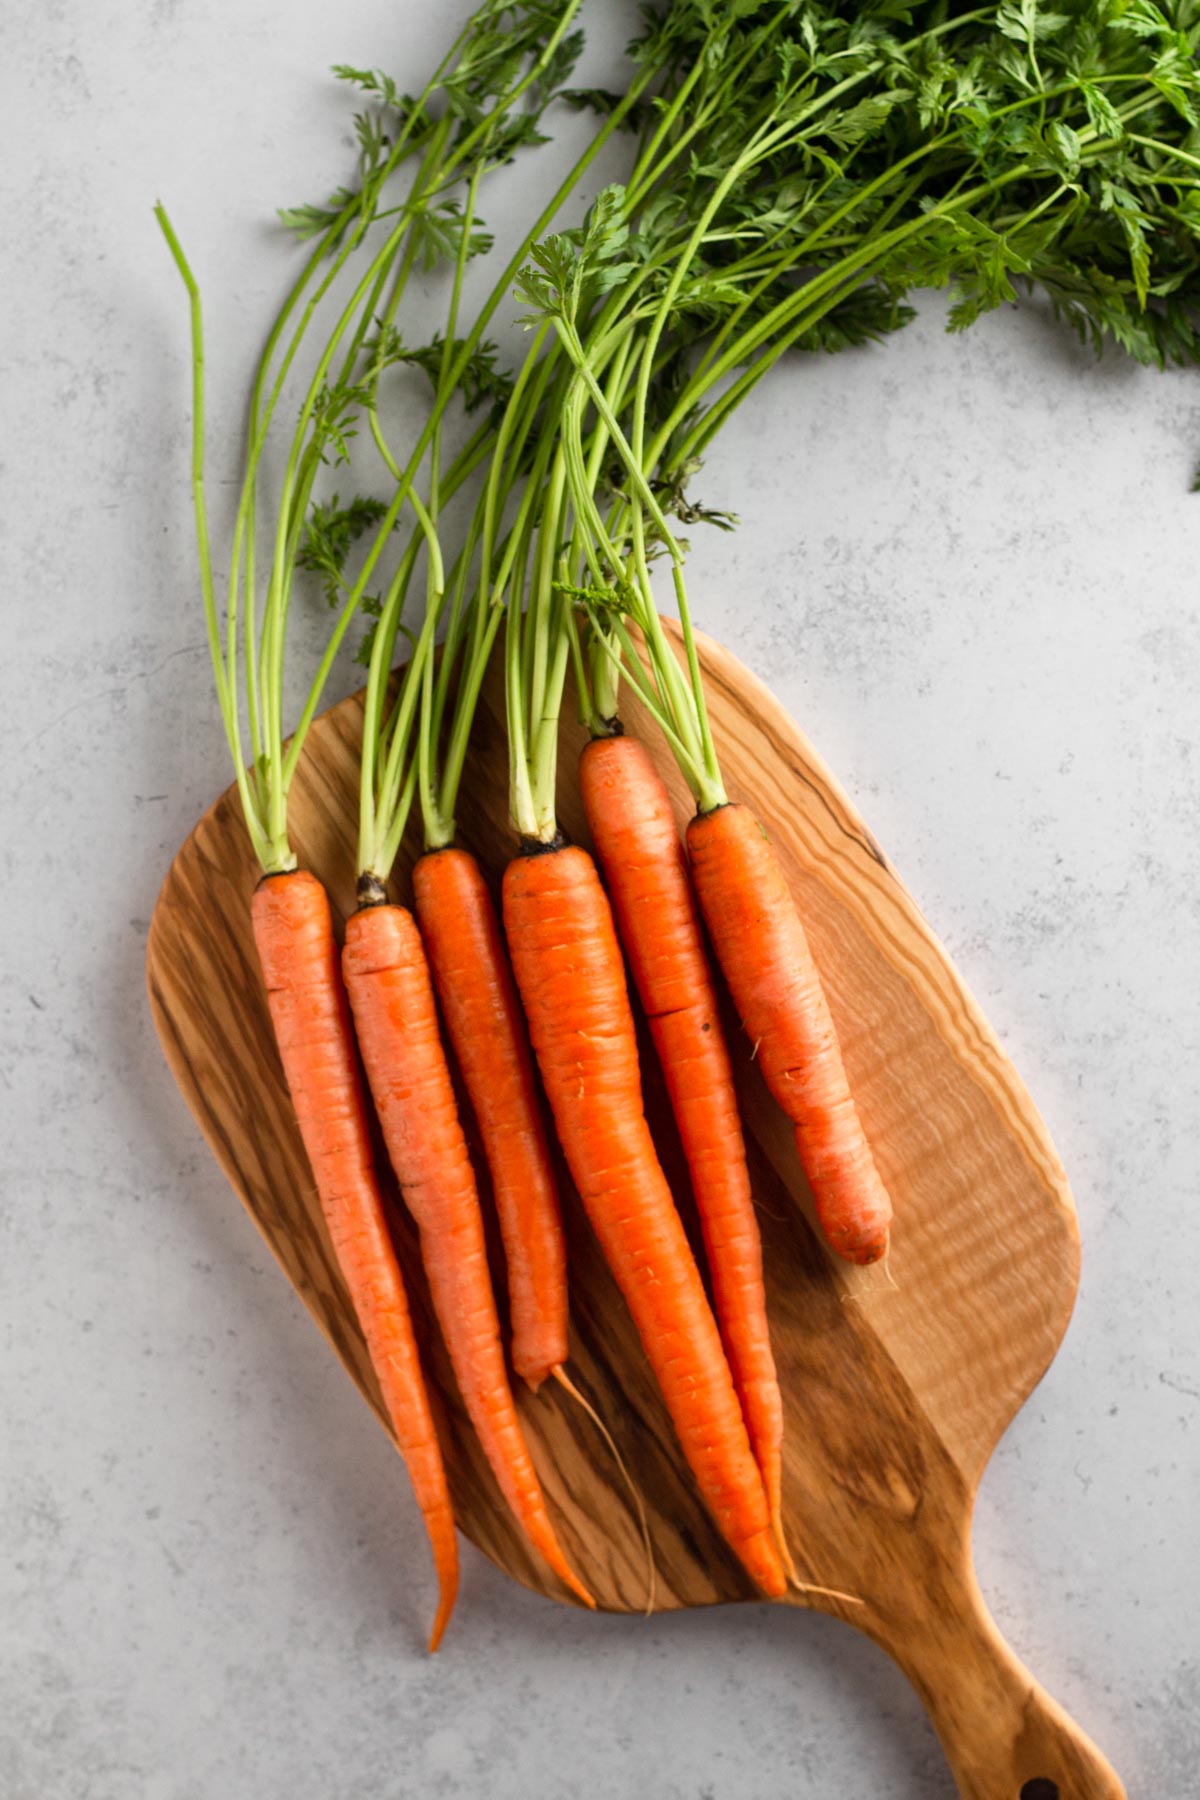 fresh carrots with stems on a wooden cutting board